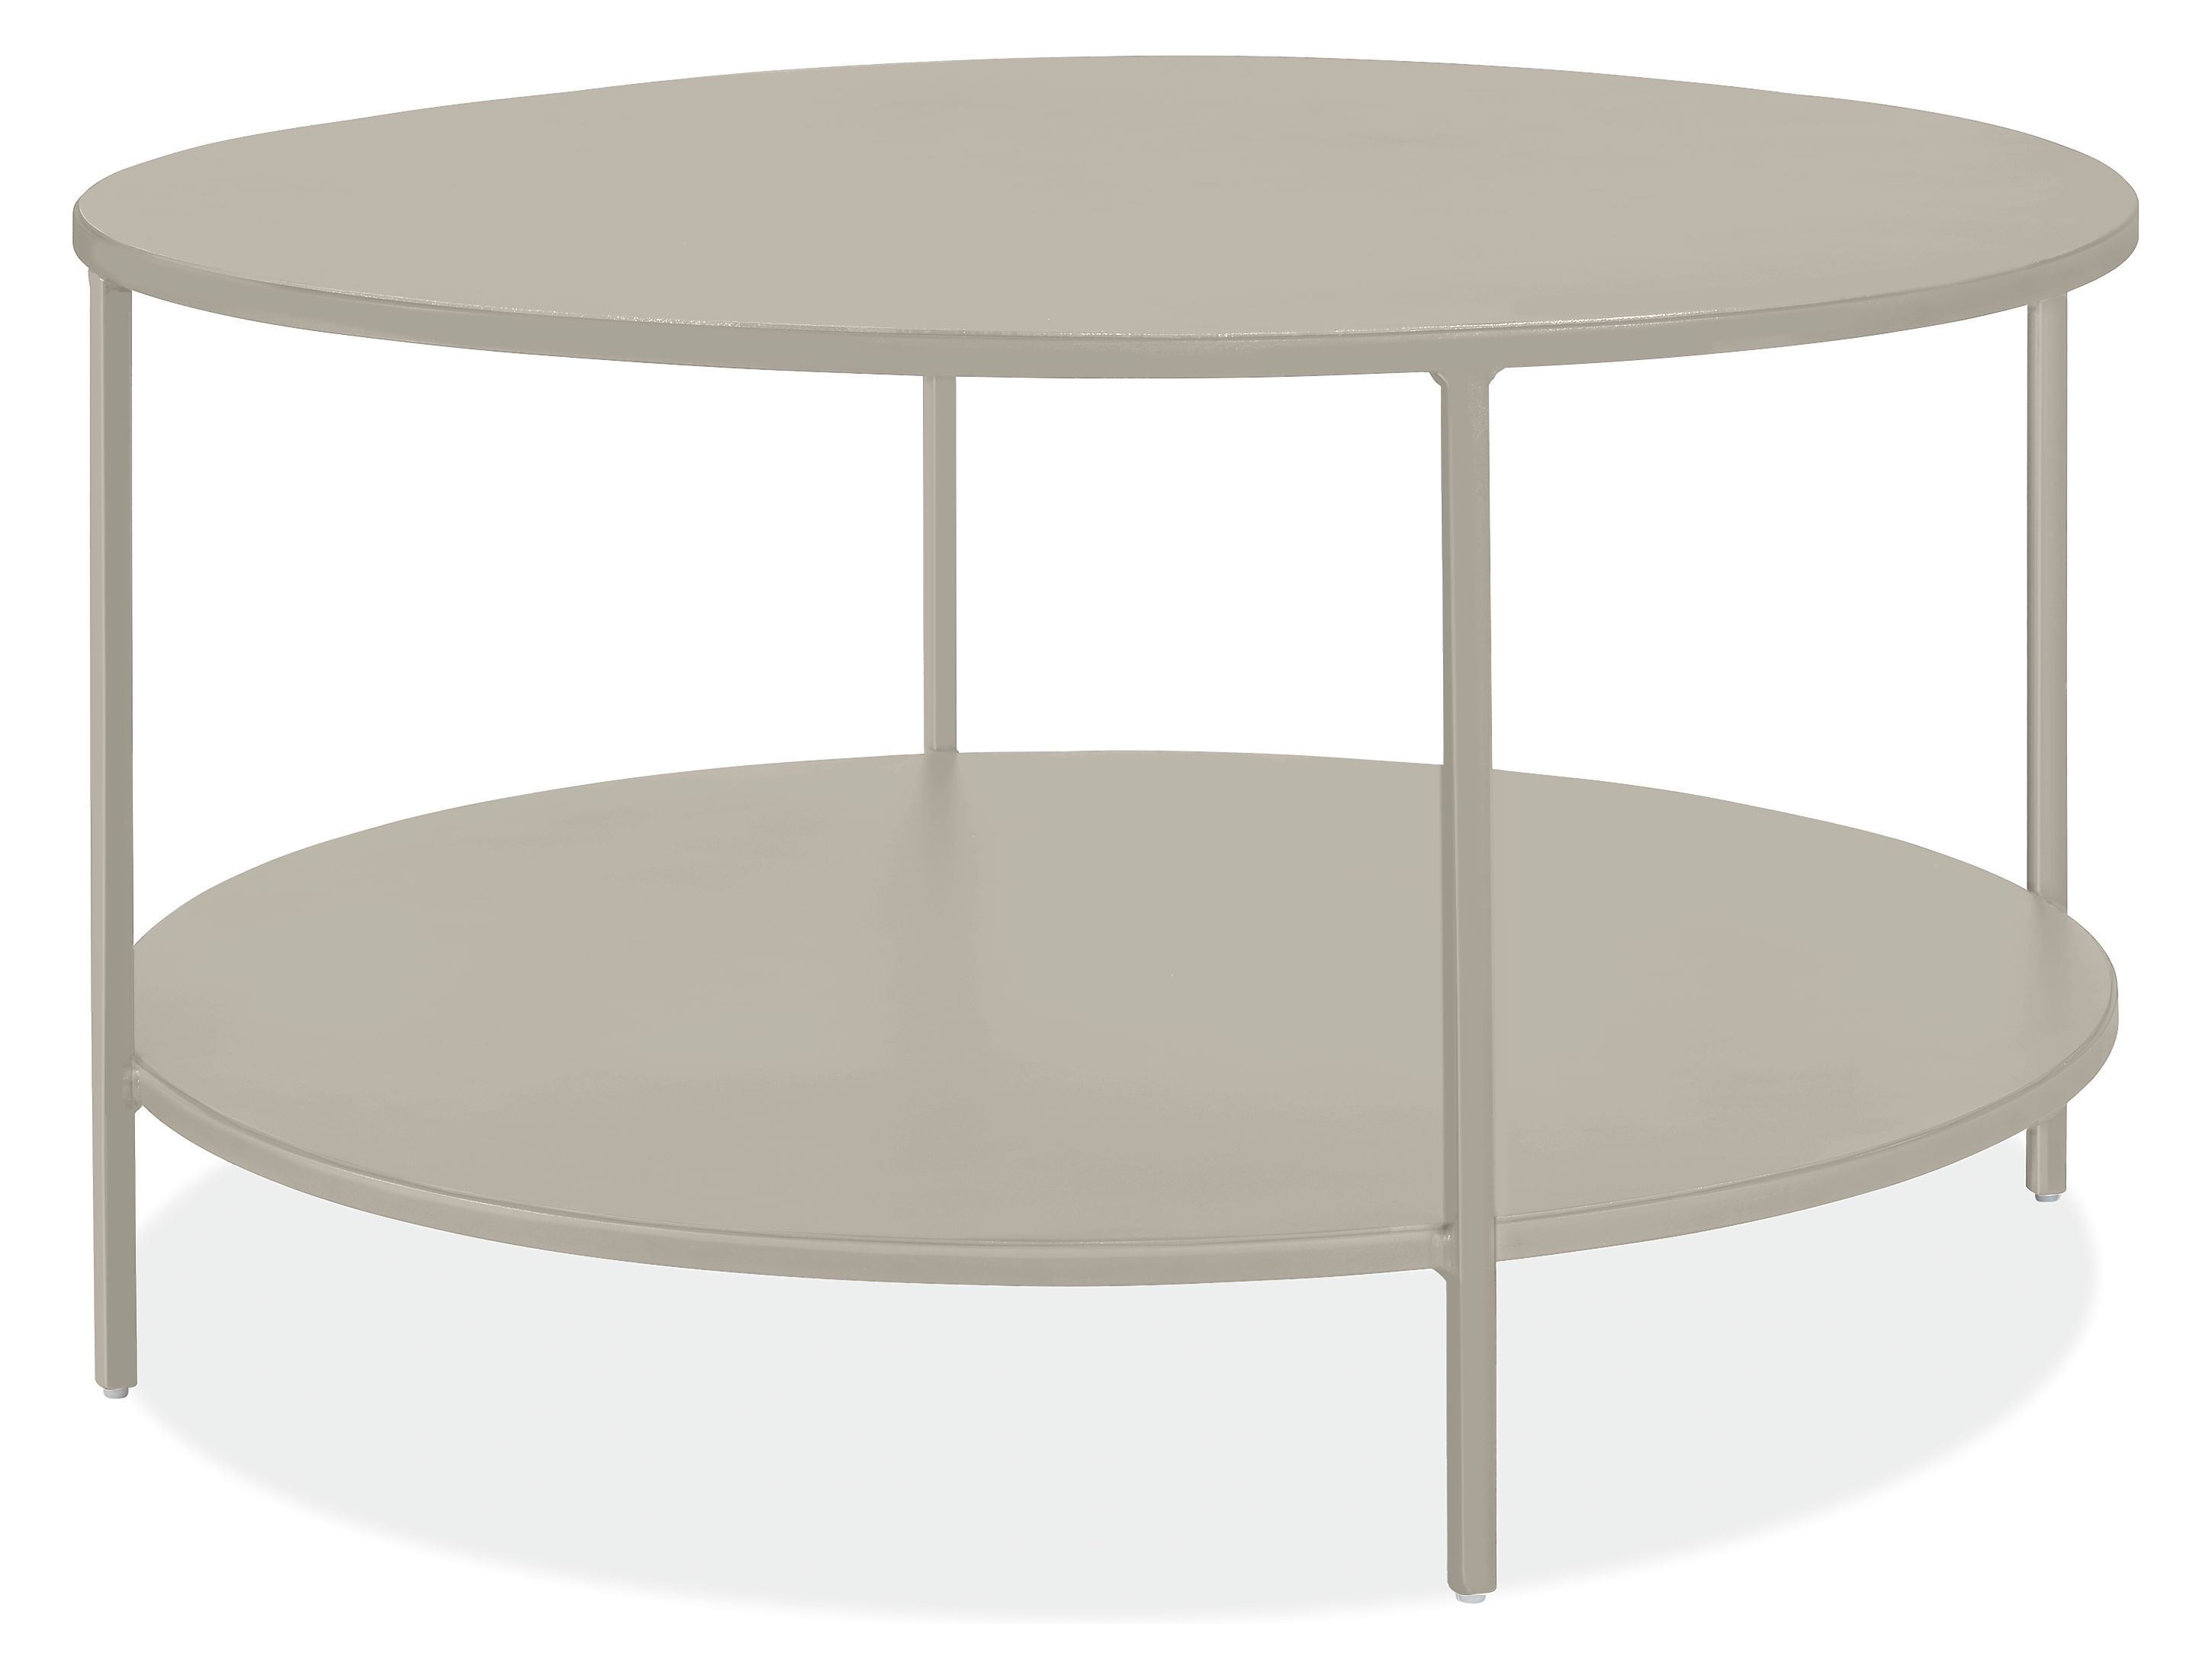 Coffee Table Circle : Set Of 2 Marseille Round Coffee Tables / The latest on our store health and safety plans.